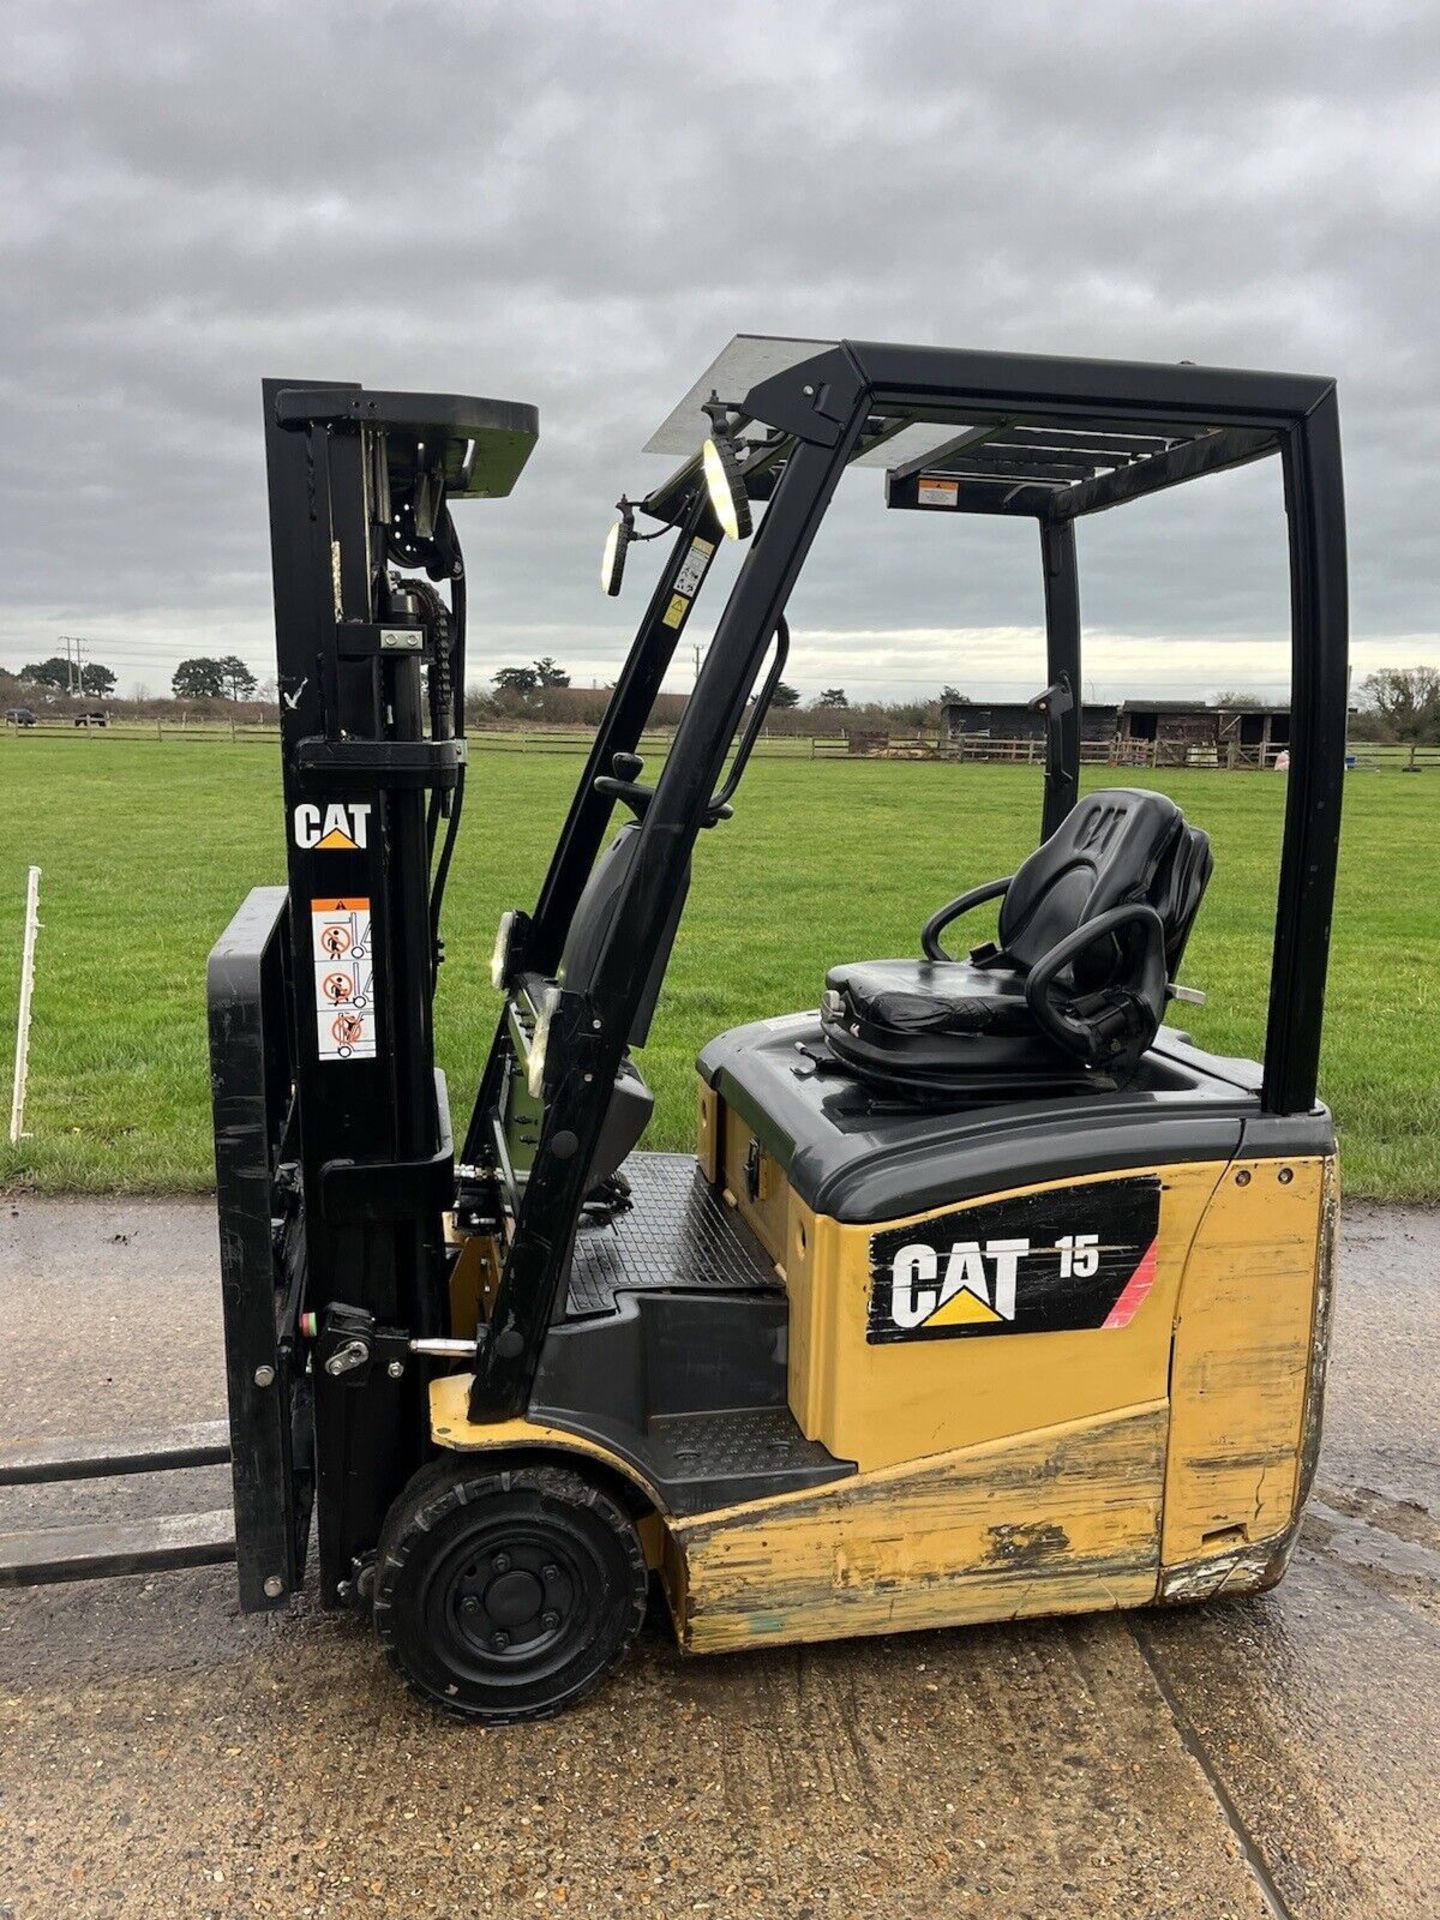 2017, CATERPILLAR 1.5 Electric Forklift Truck (Container Spec) - Image 4 of 6